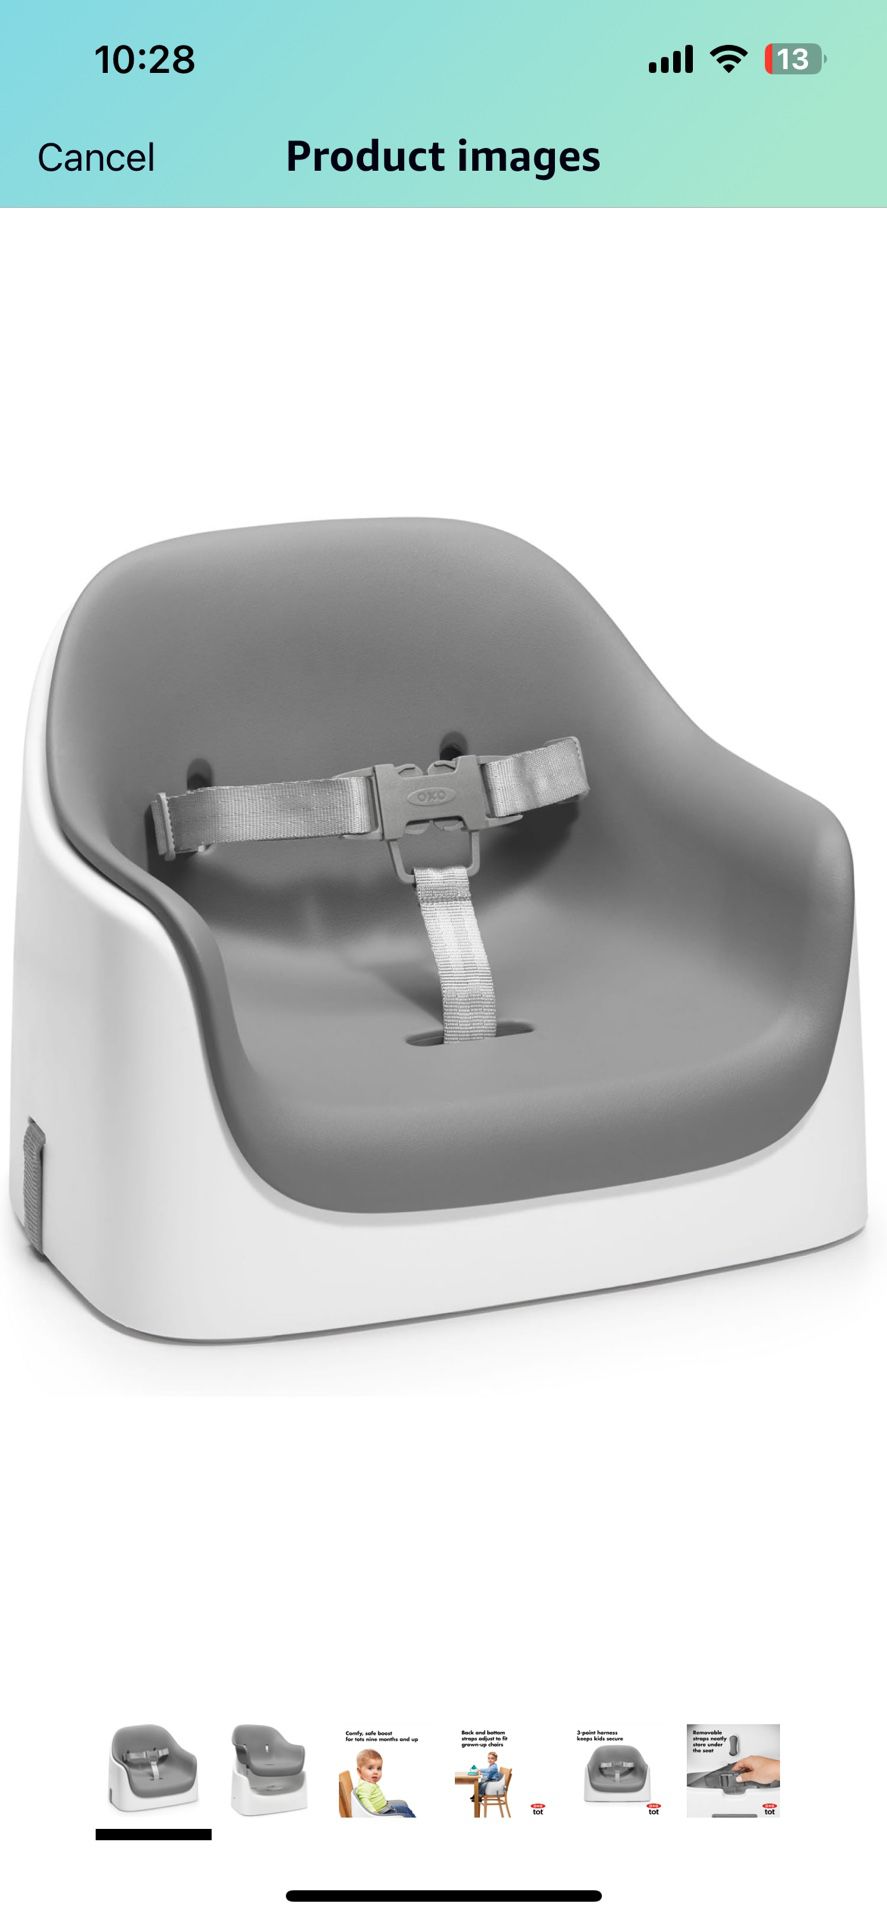 OXO Tot Nest Booster Seat